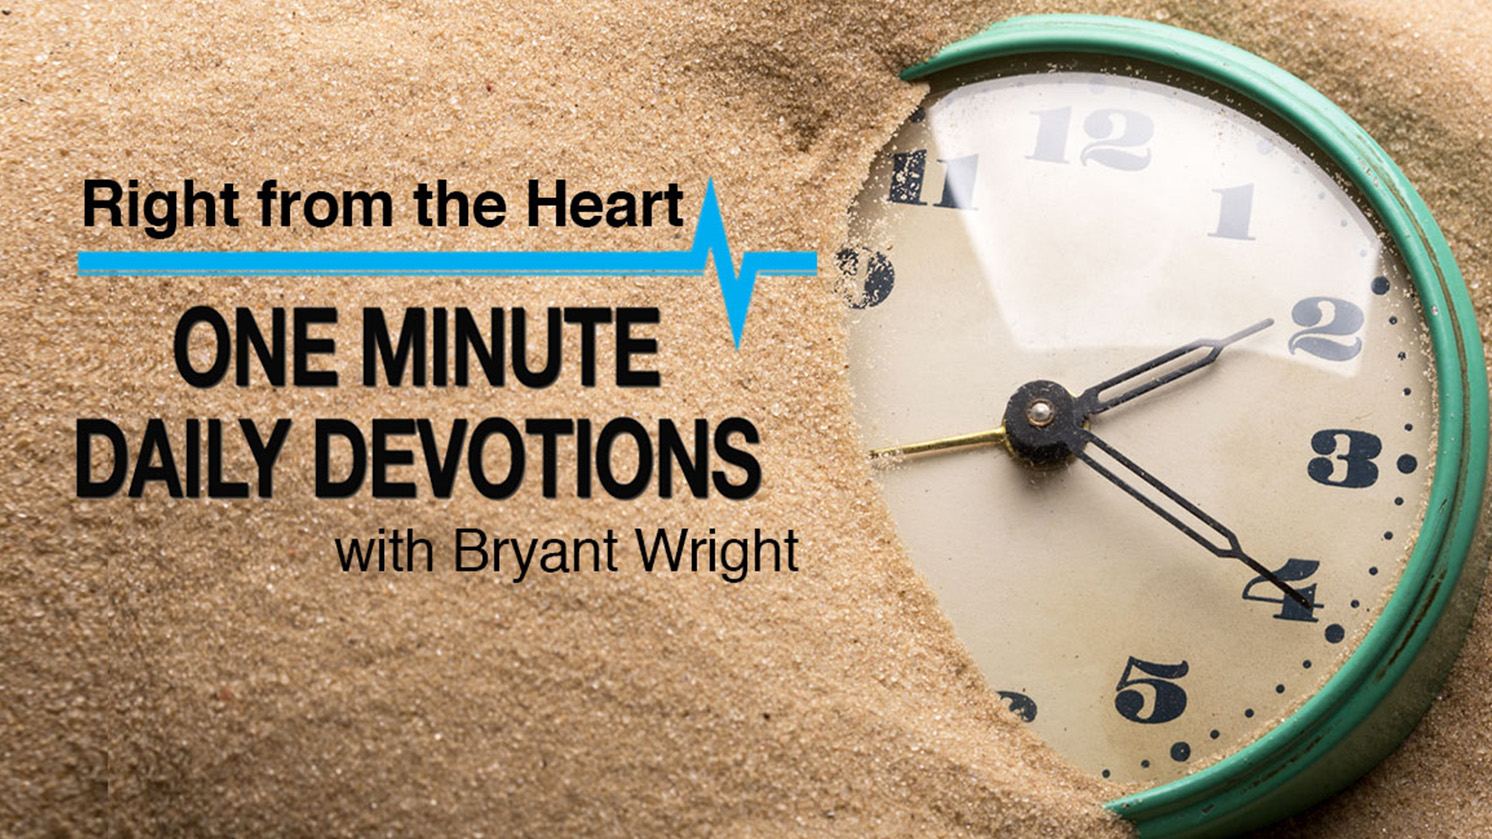 One Minute Daily Devotions